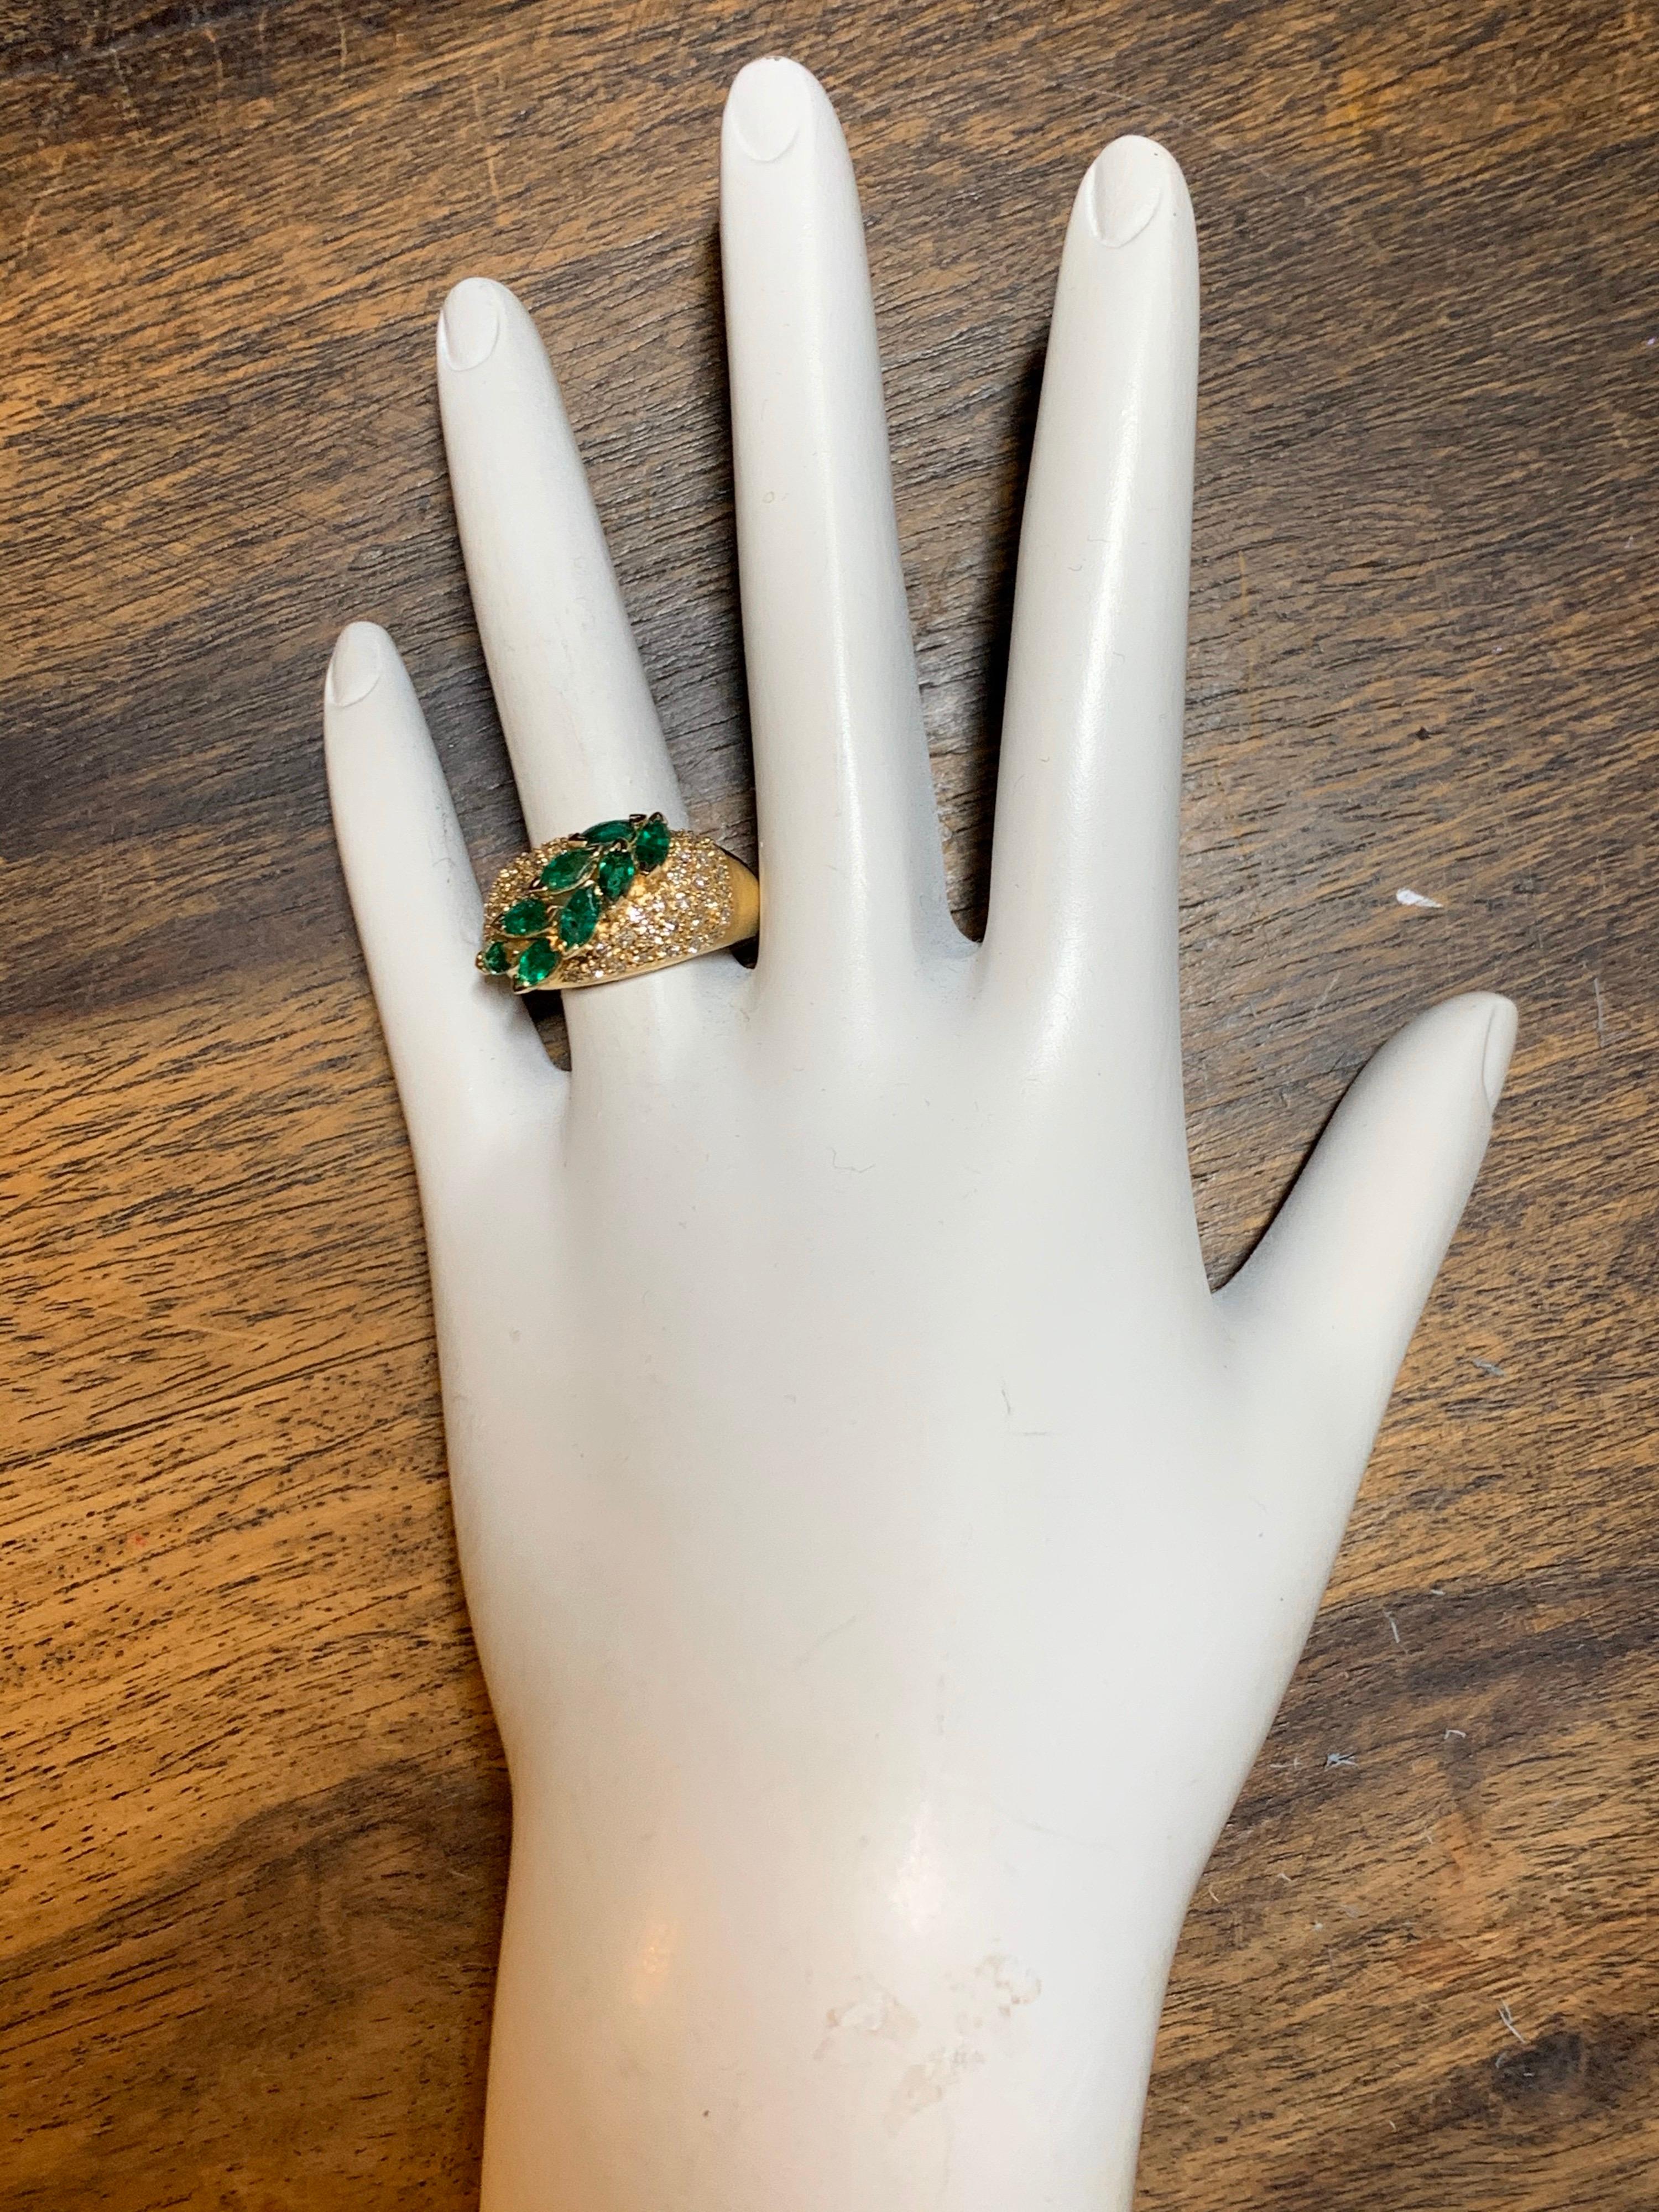 Retro 14k Yellow Gold 1.80 Carat Cocktail Ring set with 8 Natural Marquise (5.25x2.5mm) Shaped Emeralds weighing approximately 1.35 carats & 48 Natural Round Brilliant Diamonds weighing approximately 0.45 carats. Circa 1960. 

Ring size is 6.25,